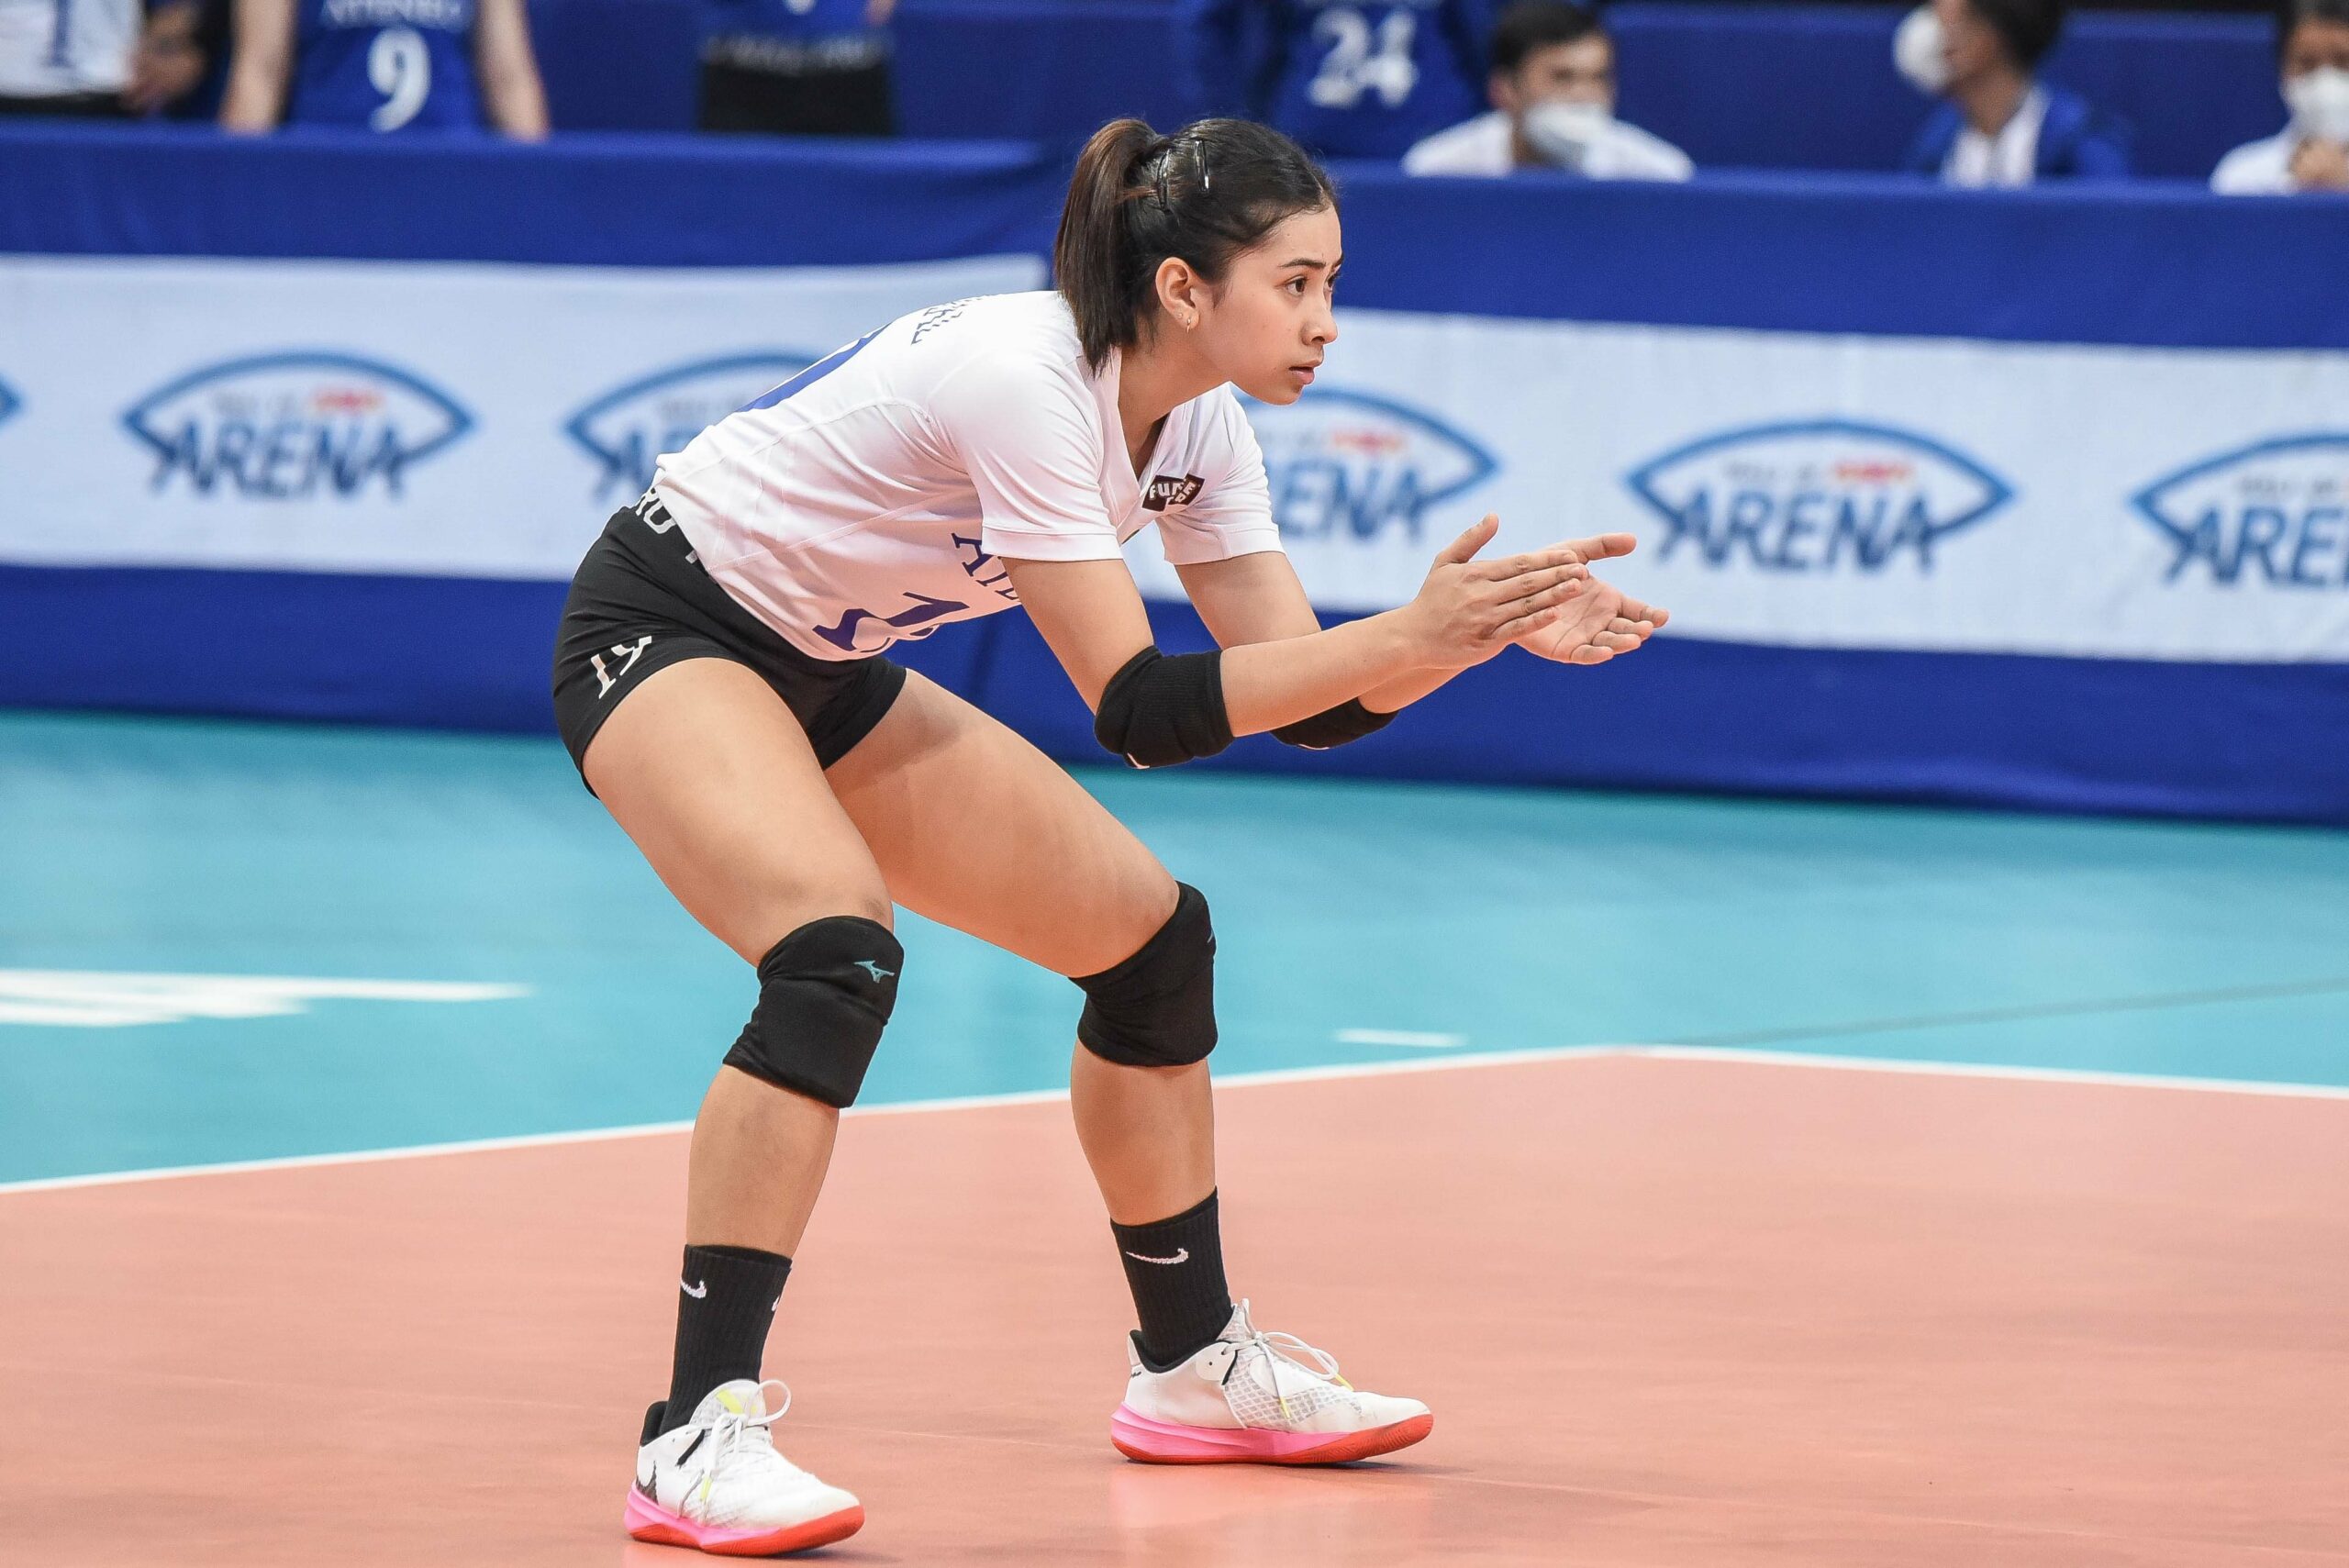 UAAP-Season-84-Womens-Volleyball-UST-vs-Ateneo-Roma-Doromal-1-scaled Almadro hopes improved defense does wonders vs La Salle in do-or-die match ADMU News UAAP Volleyball  - philippine sports news